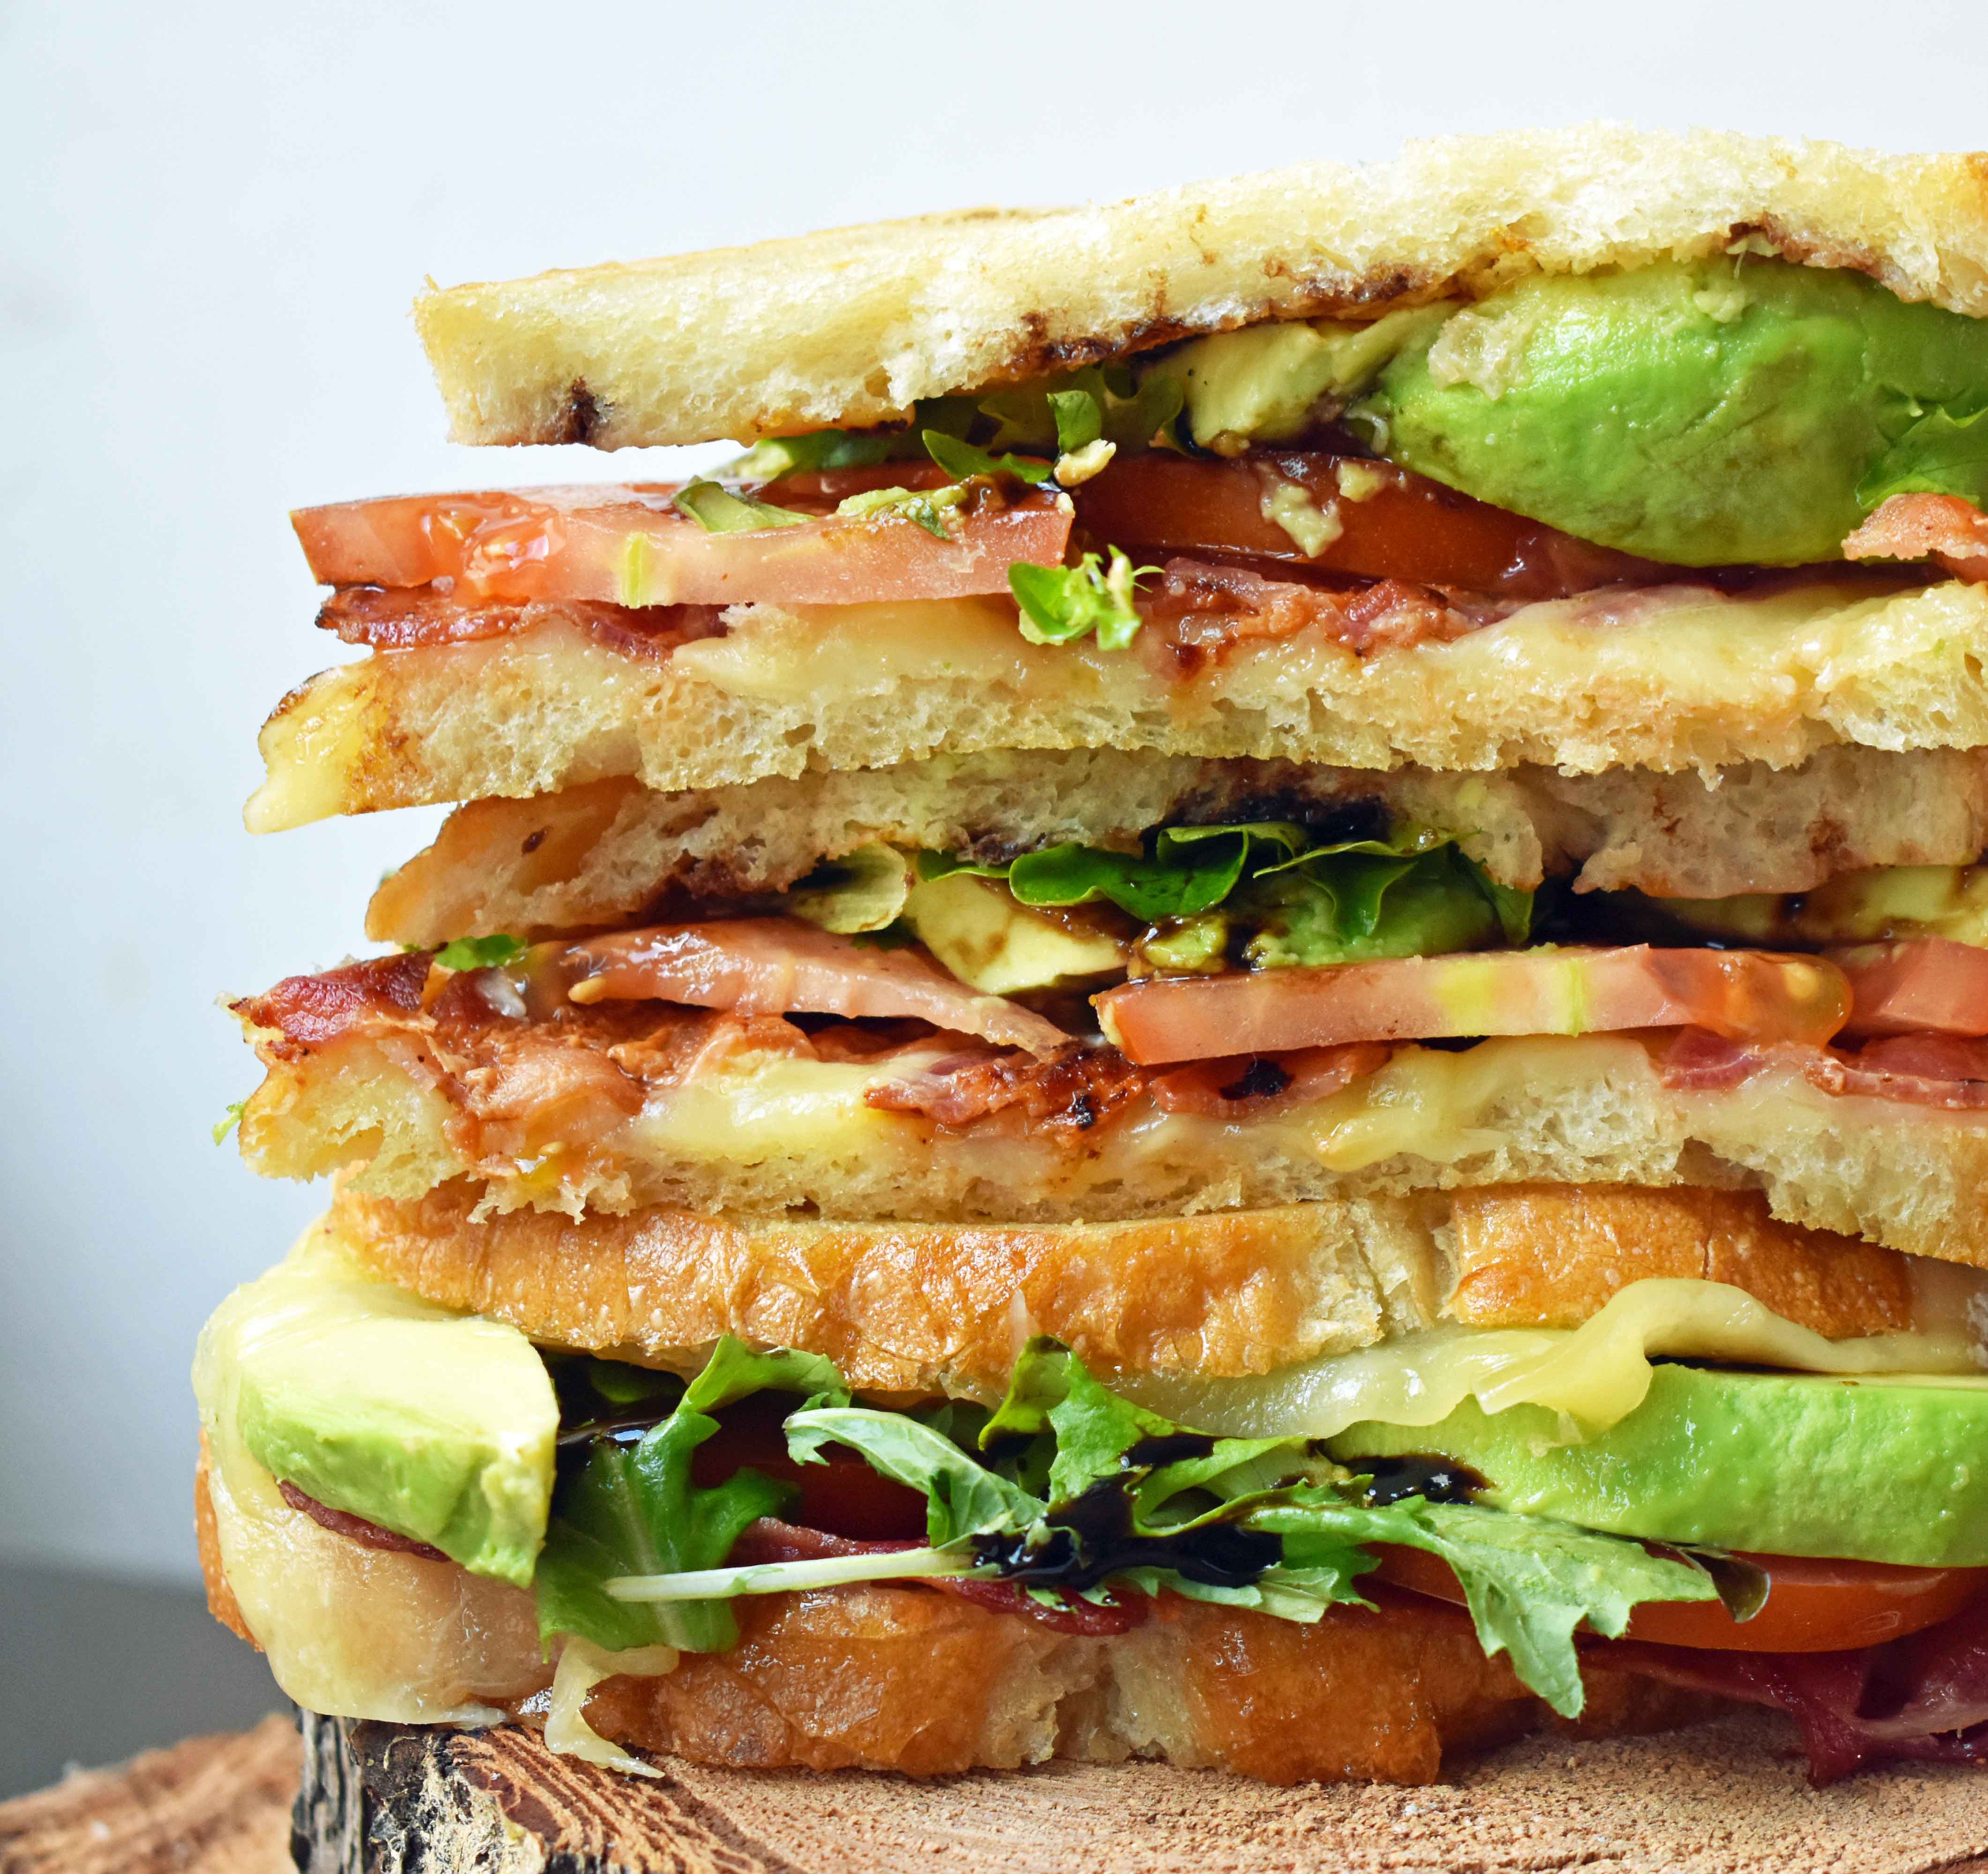 Grown Up Grilled Cheese Sandwich. Three different types of cheese - Swiss, White Sharp Cheddar, and Pepper Jack, crispy bacon, creamy avocado, thinly sliced tomatoes, spring mix, and drizzled with balsamic glaze. A grilled cheese sandwich full of flavor! www.modernhoney.com